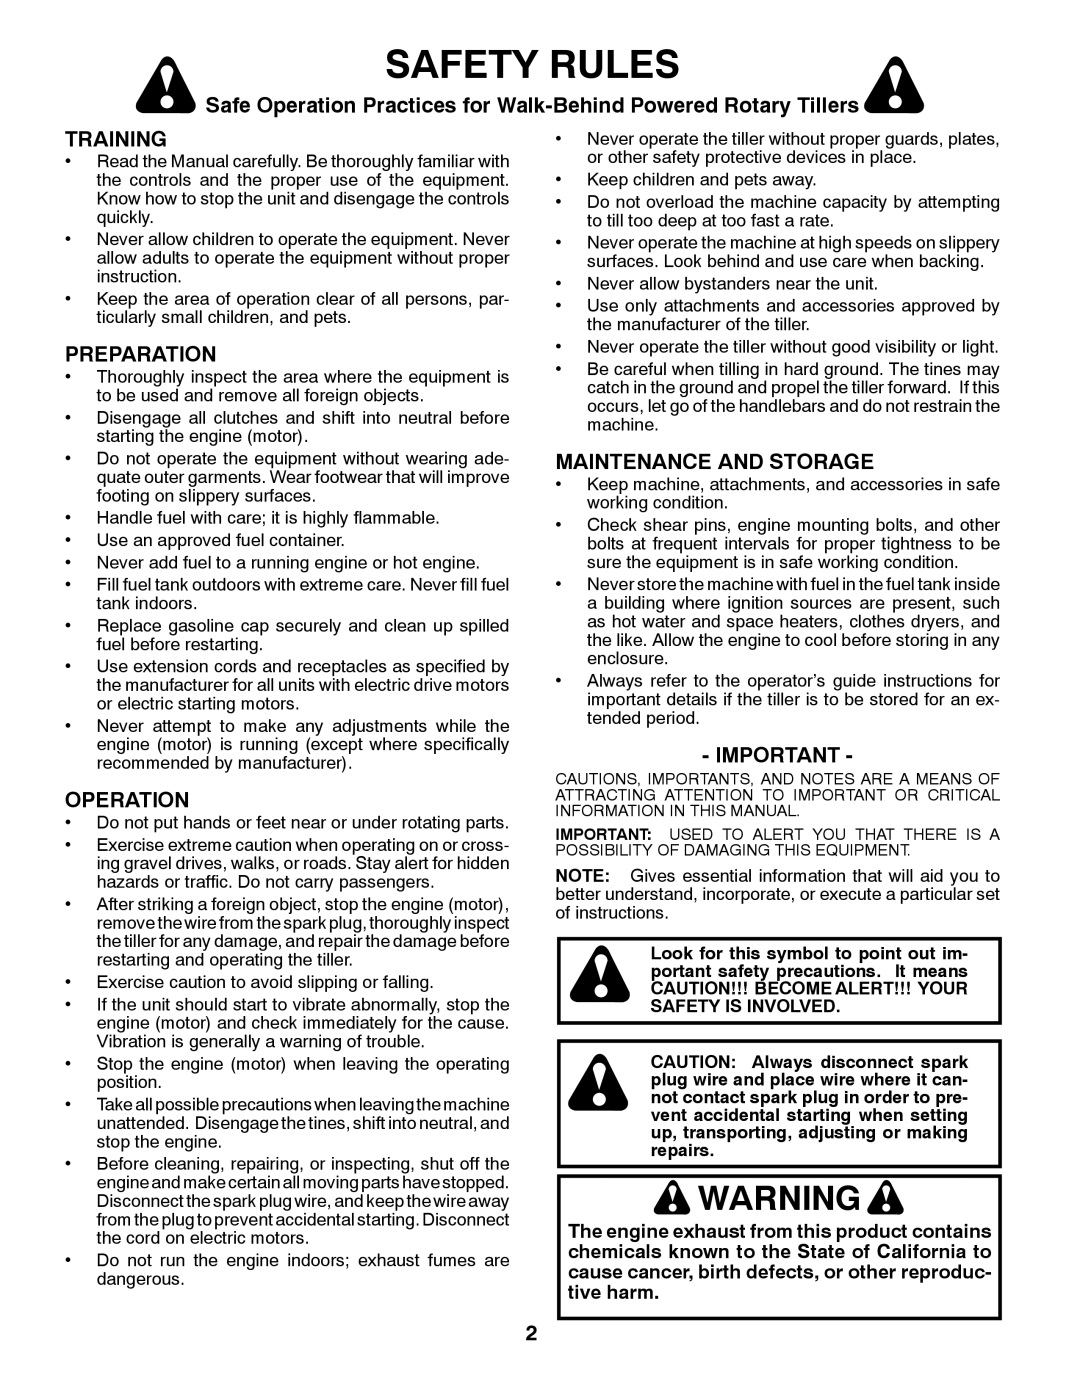 Poulan PRRT900 manual Safety Rules, Safe Operation Practices for Walk-Behind Powered Rotary Tillers, Training, Preparation 